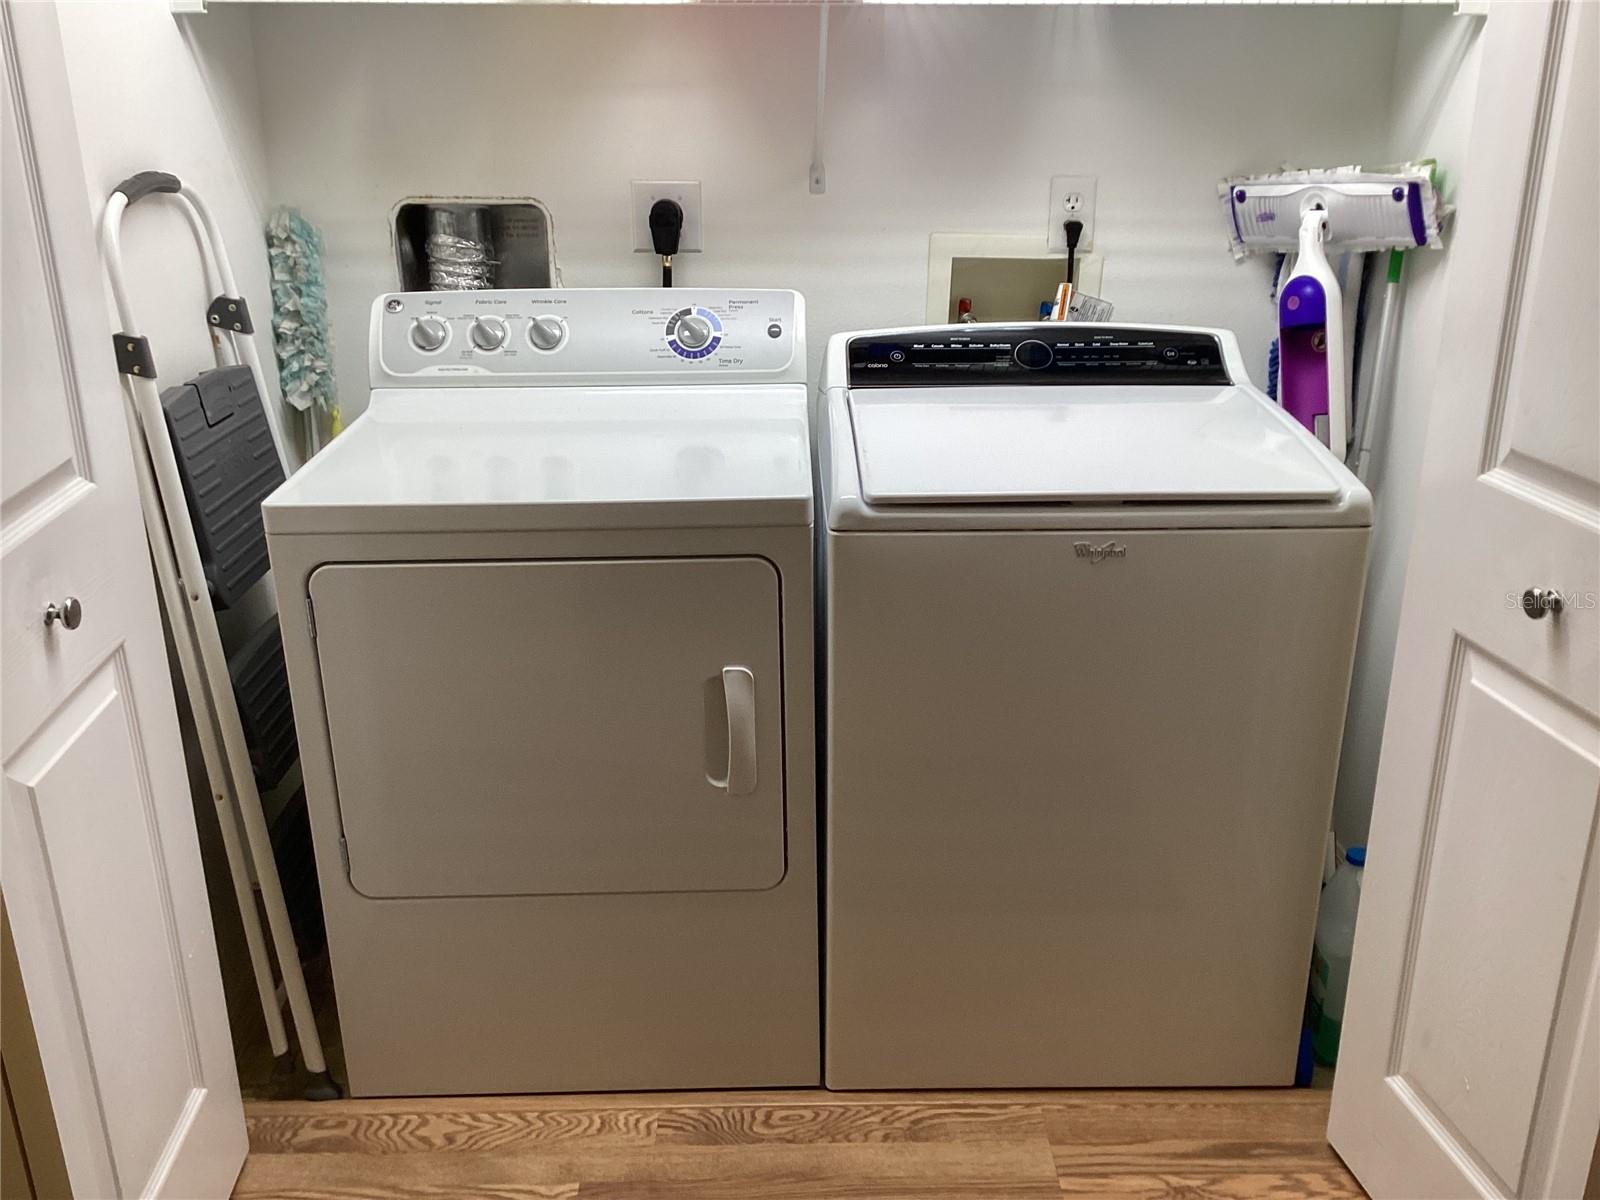 Washer and dryer just of the kitchen